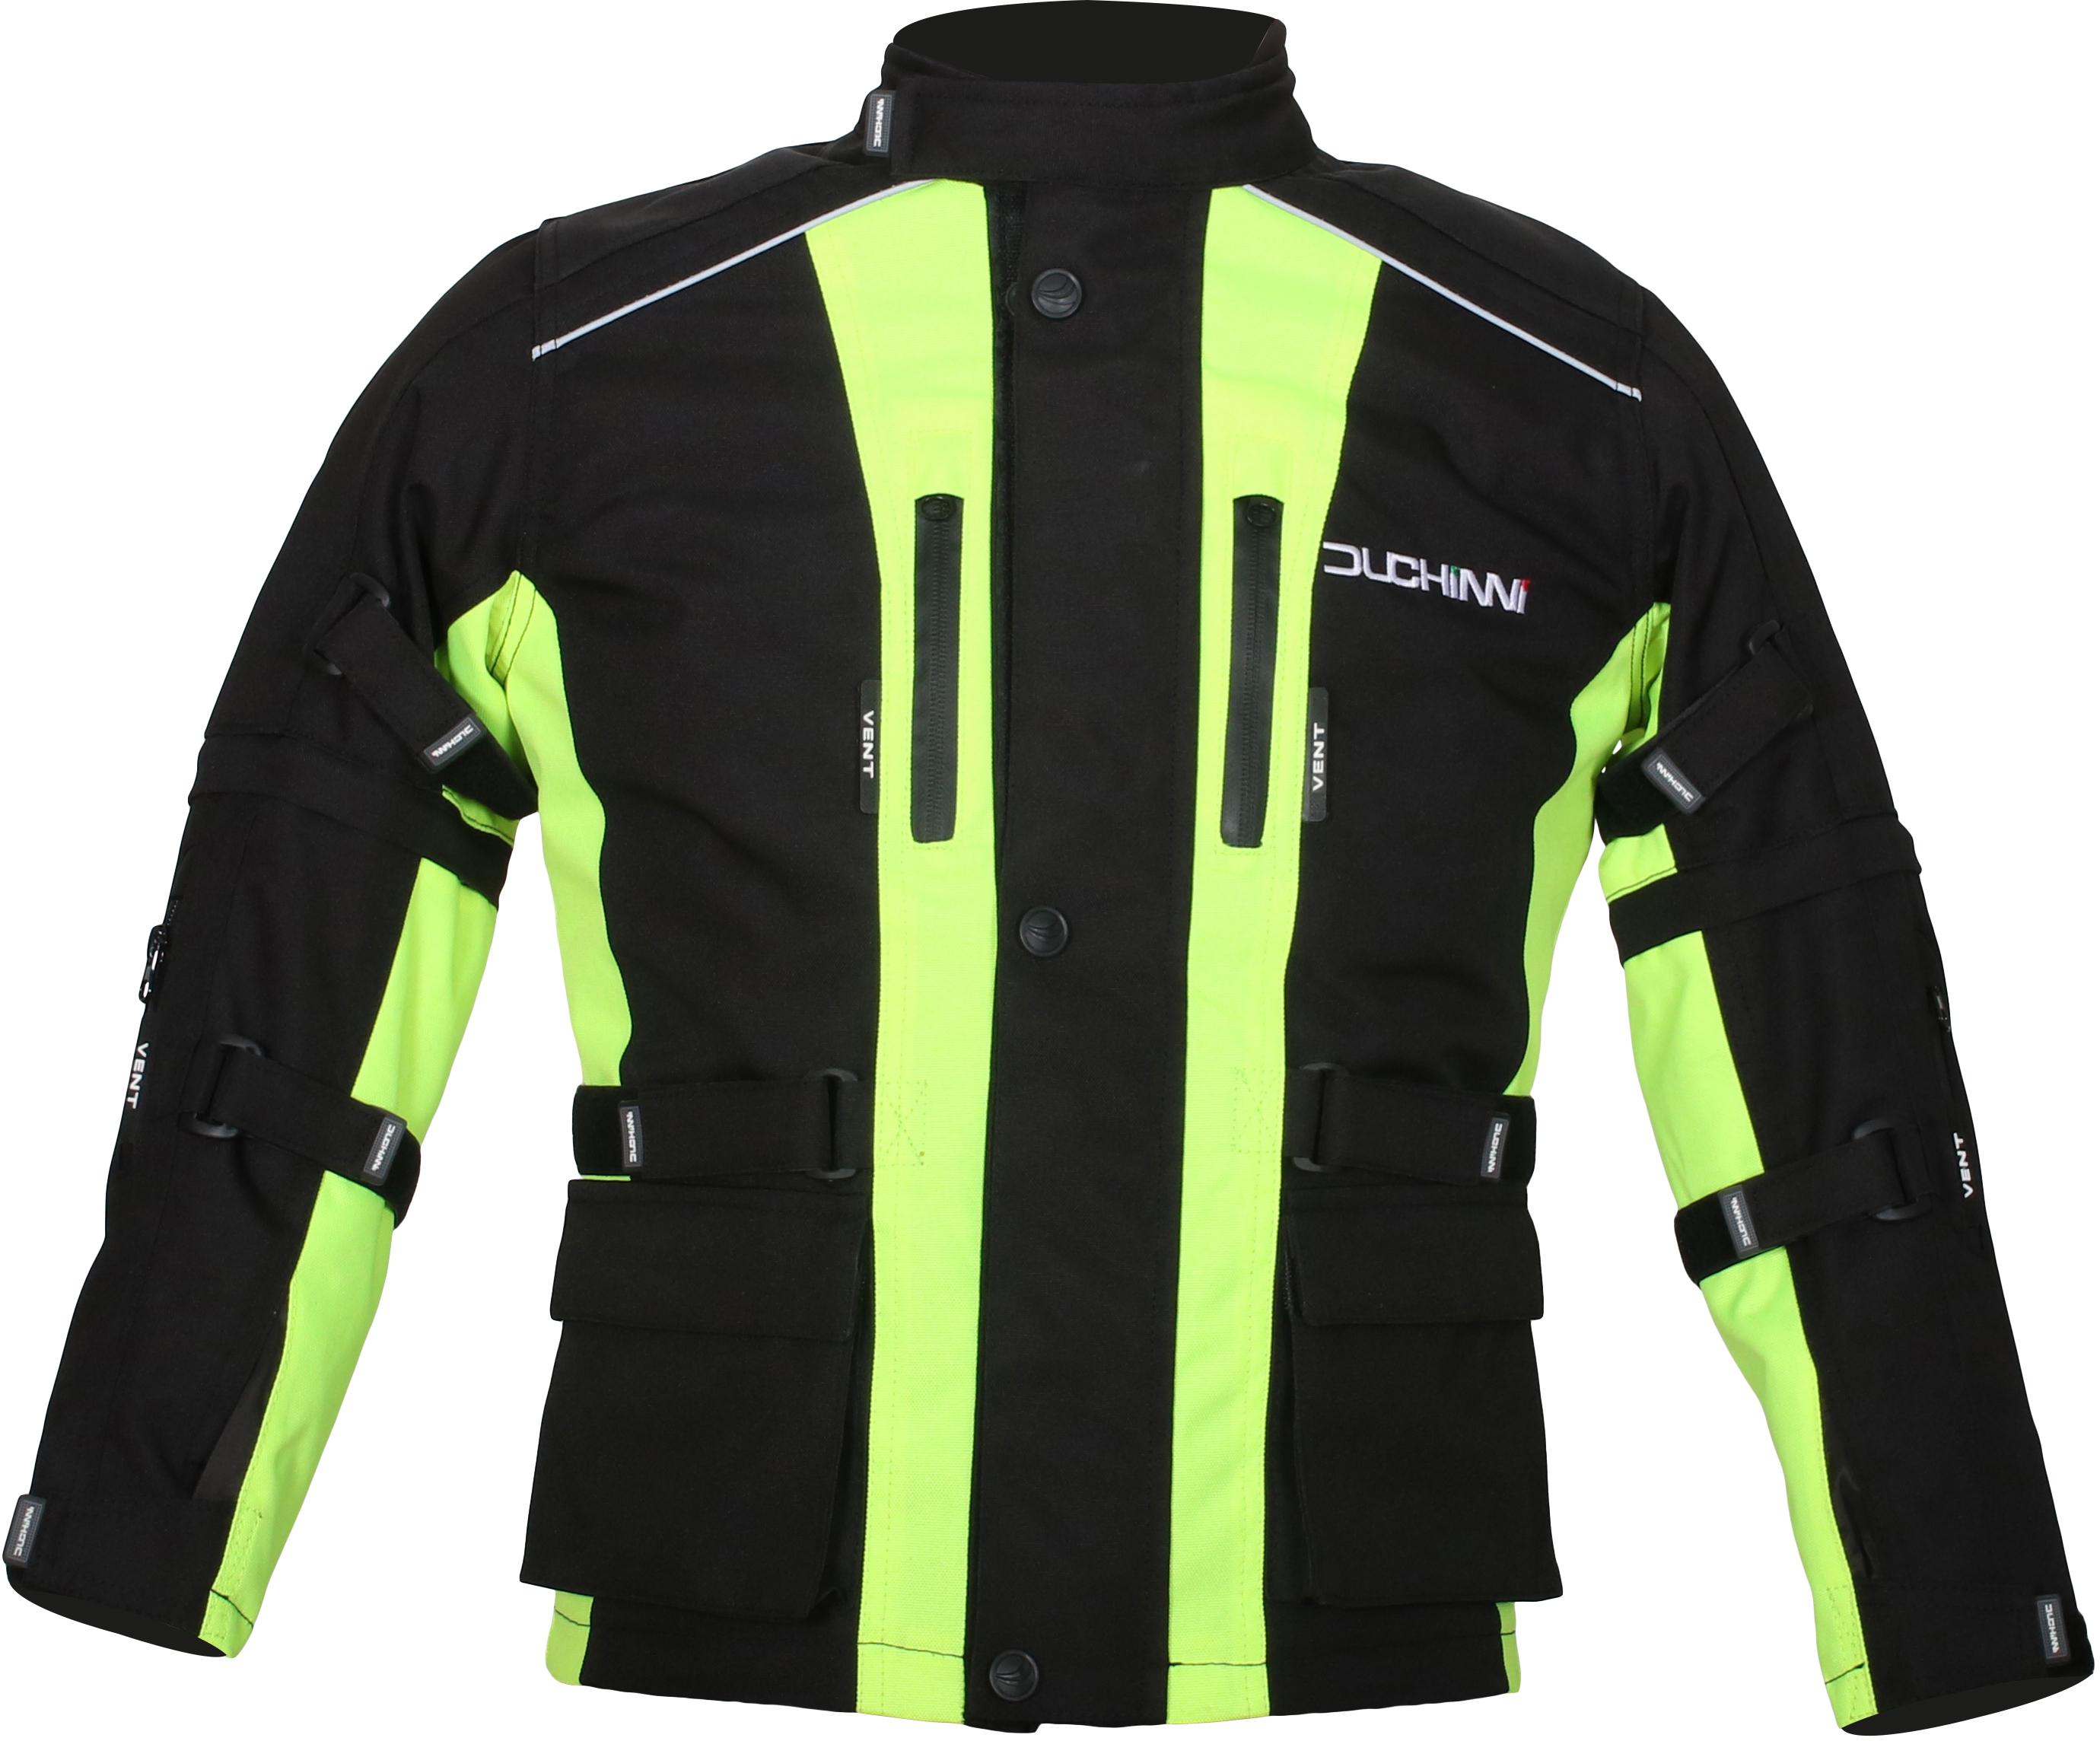 Duchinni Jago Youth Motorcycle Jacket - Black And Neon, L